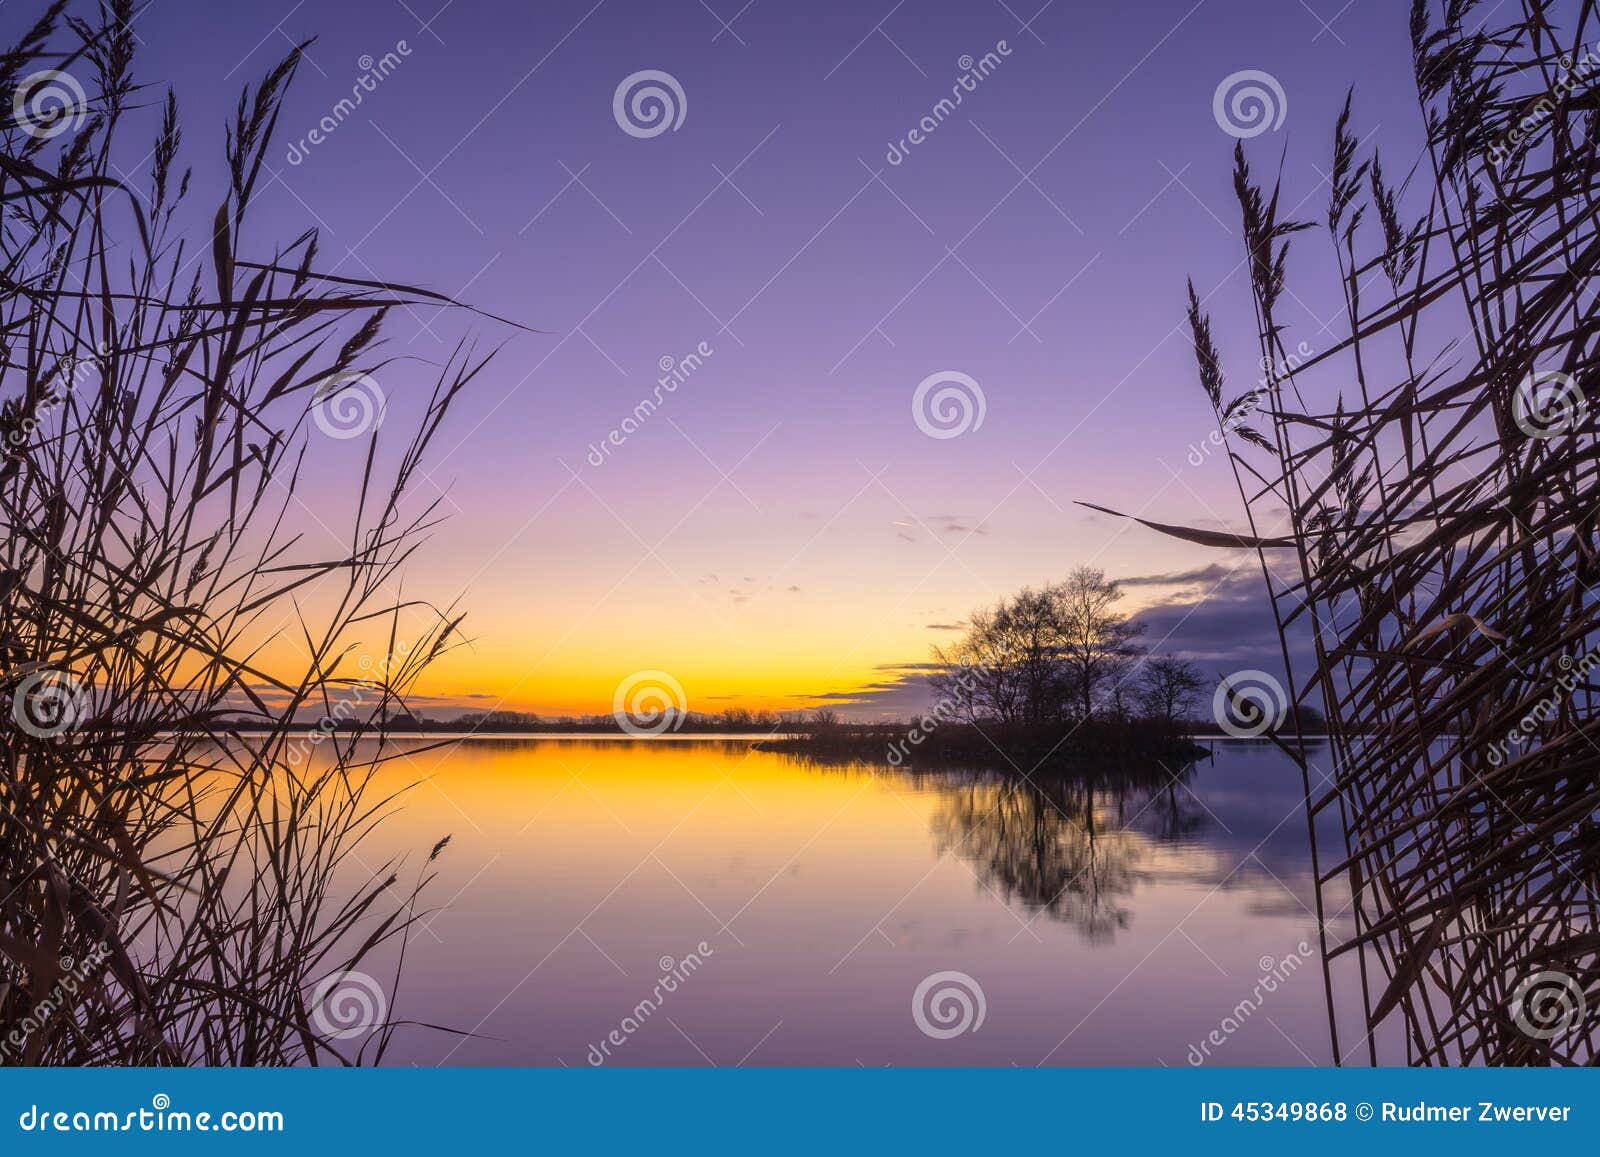 silhouette of reed with serene lake during sunset